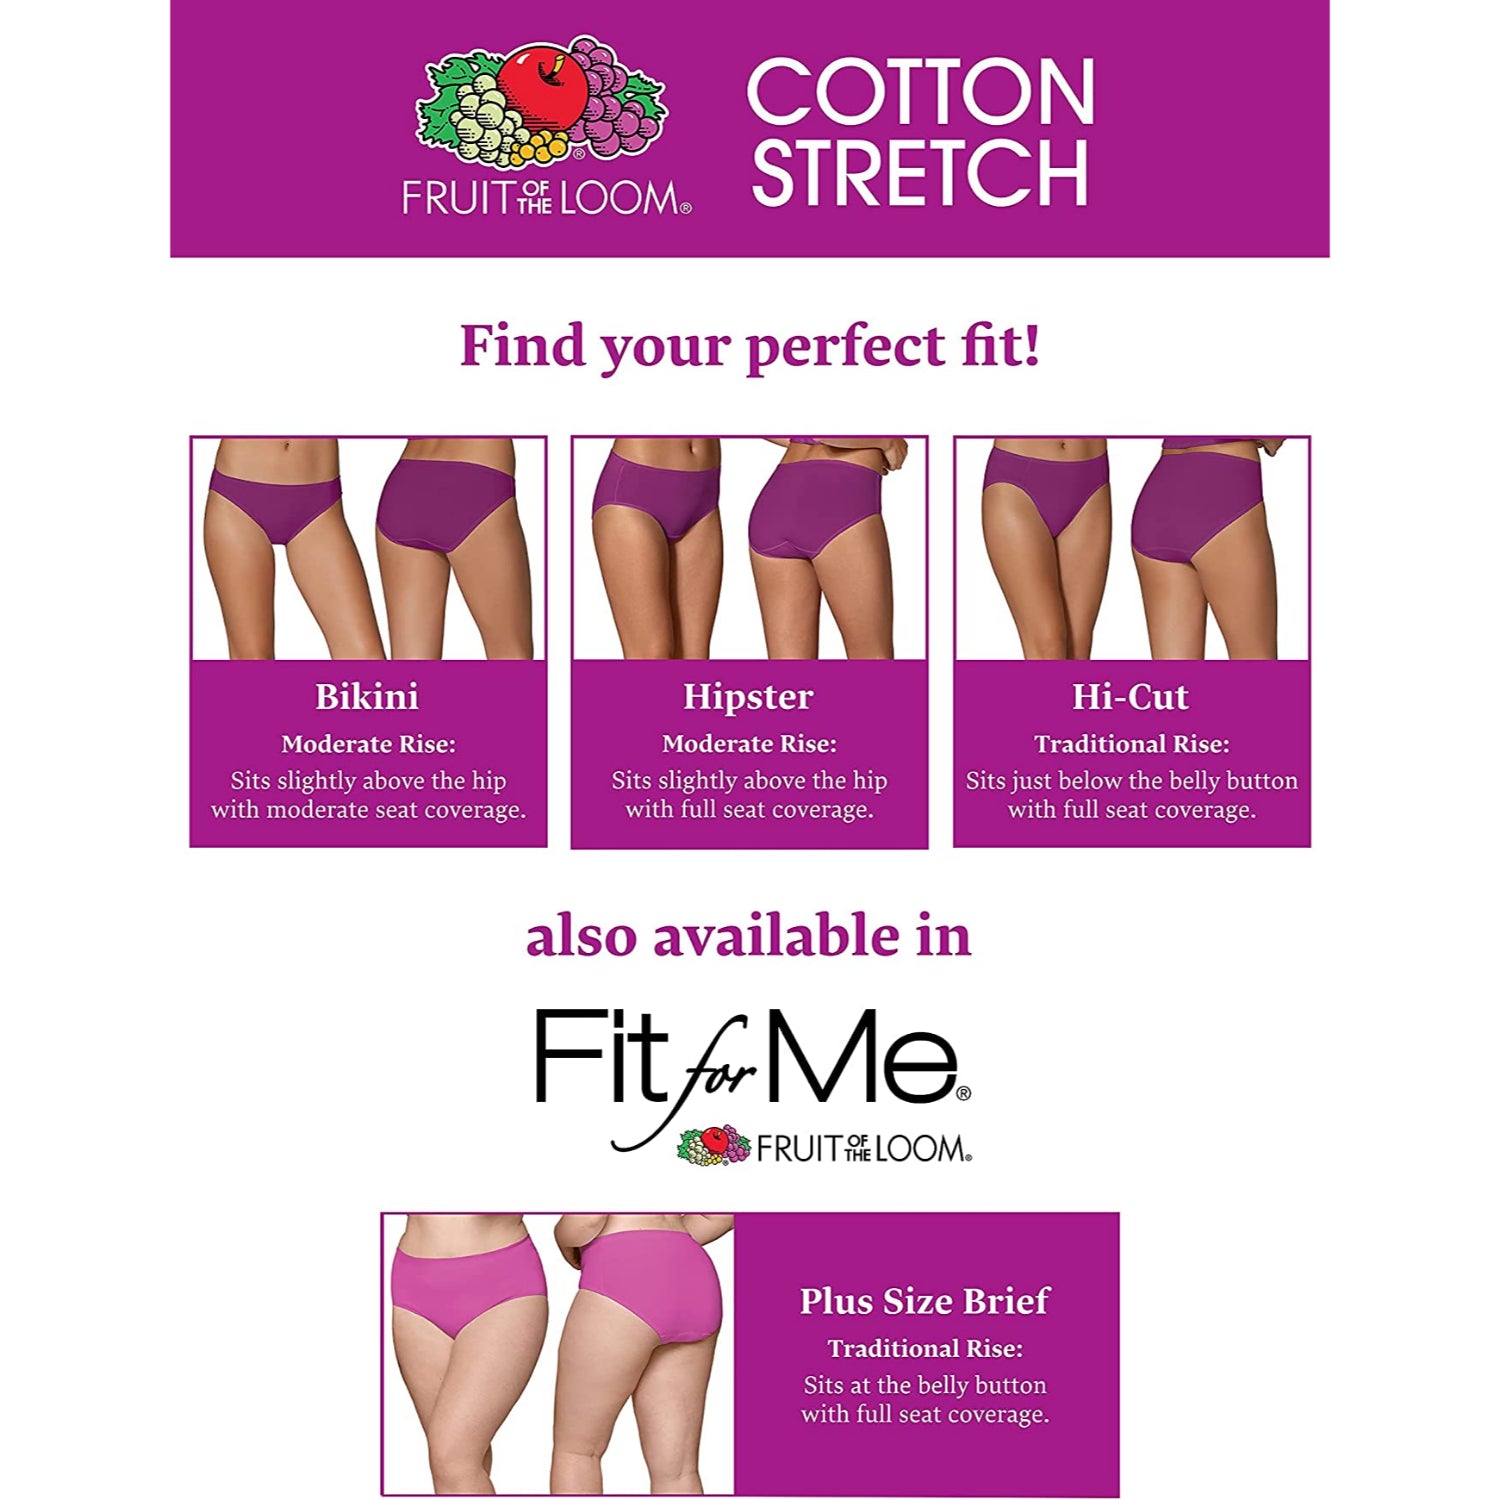 New in package! Fruit of the Loom Womens Fit for Me Women's